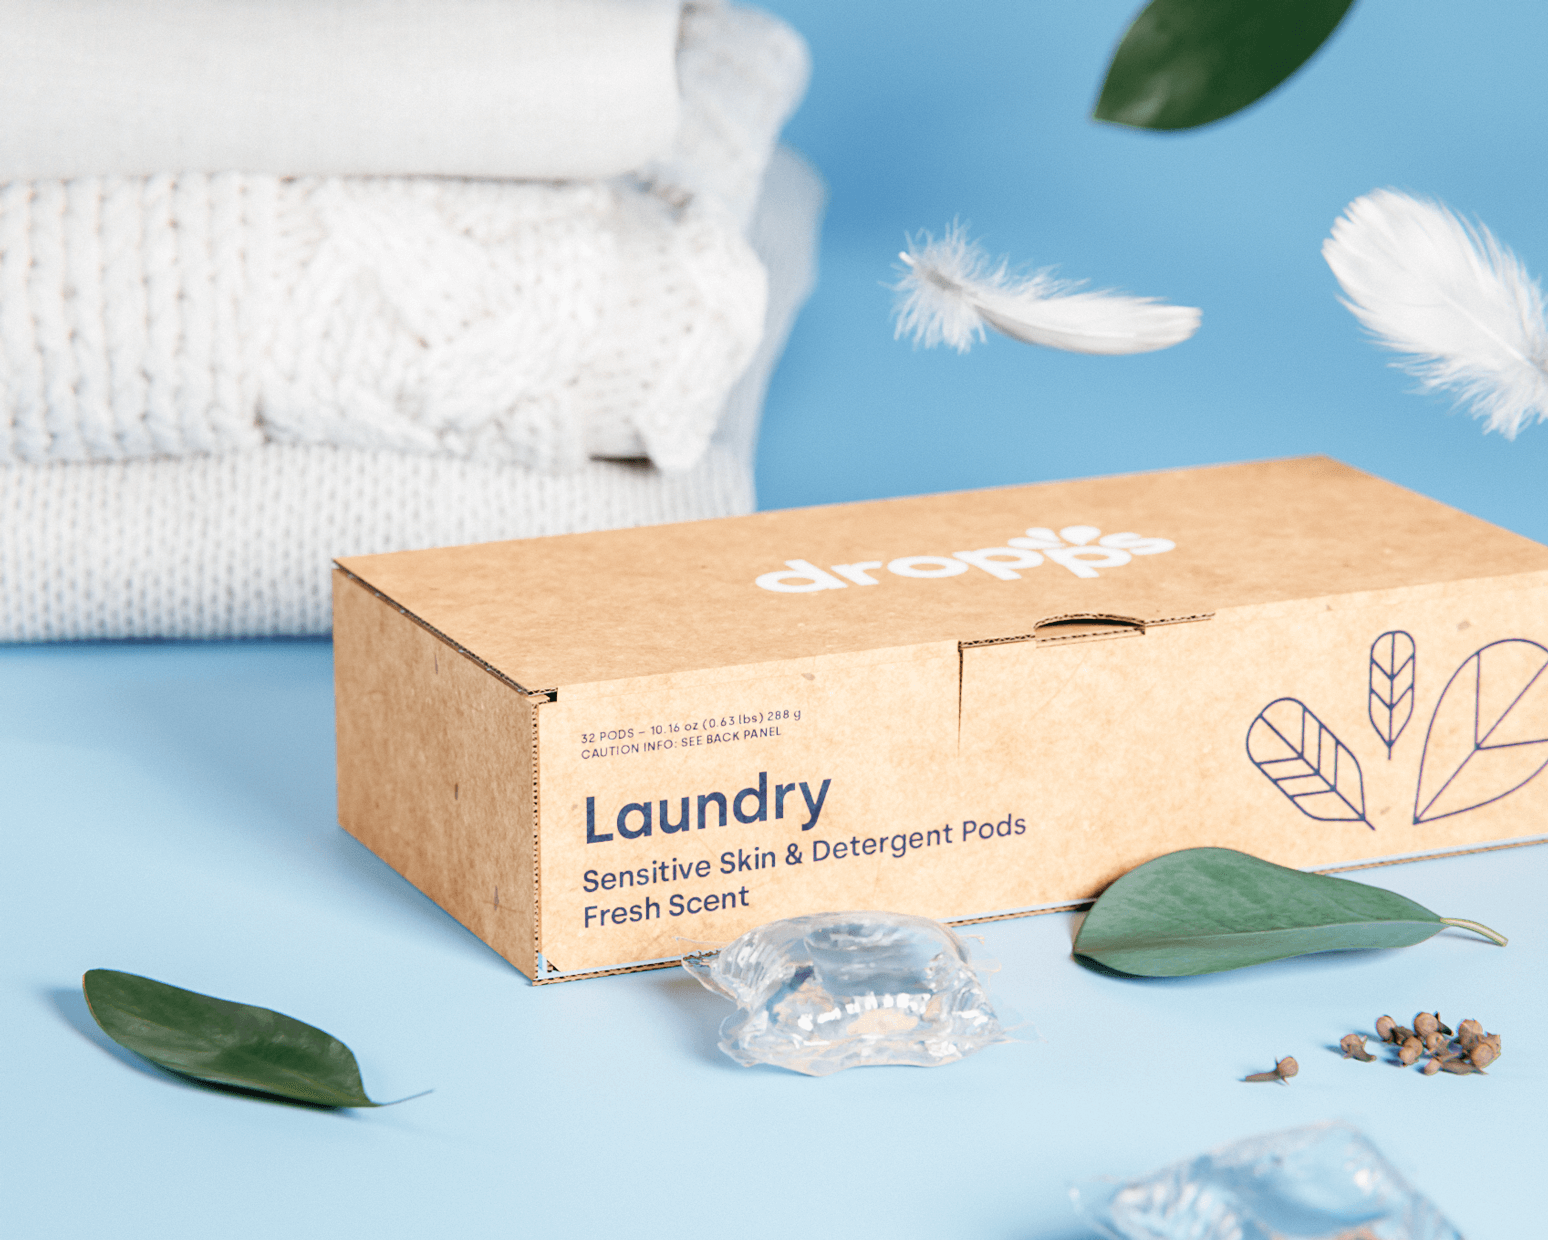 Feeling Fresh and Cleaning Up the Laundry Industry with Dropps–A box of Dropps’ Sensitive Skin and Detergent Pods surrounded by white folded sweaters, feathers, leaves, and laundry pods. 